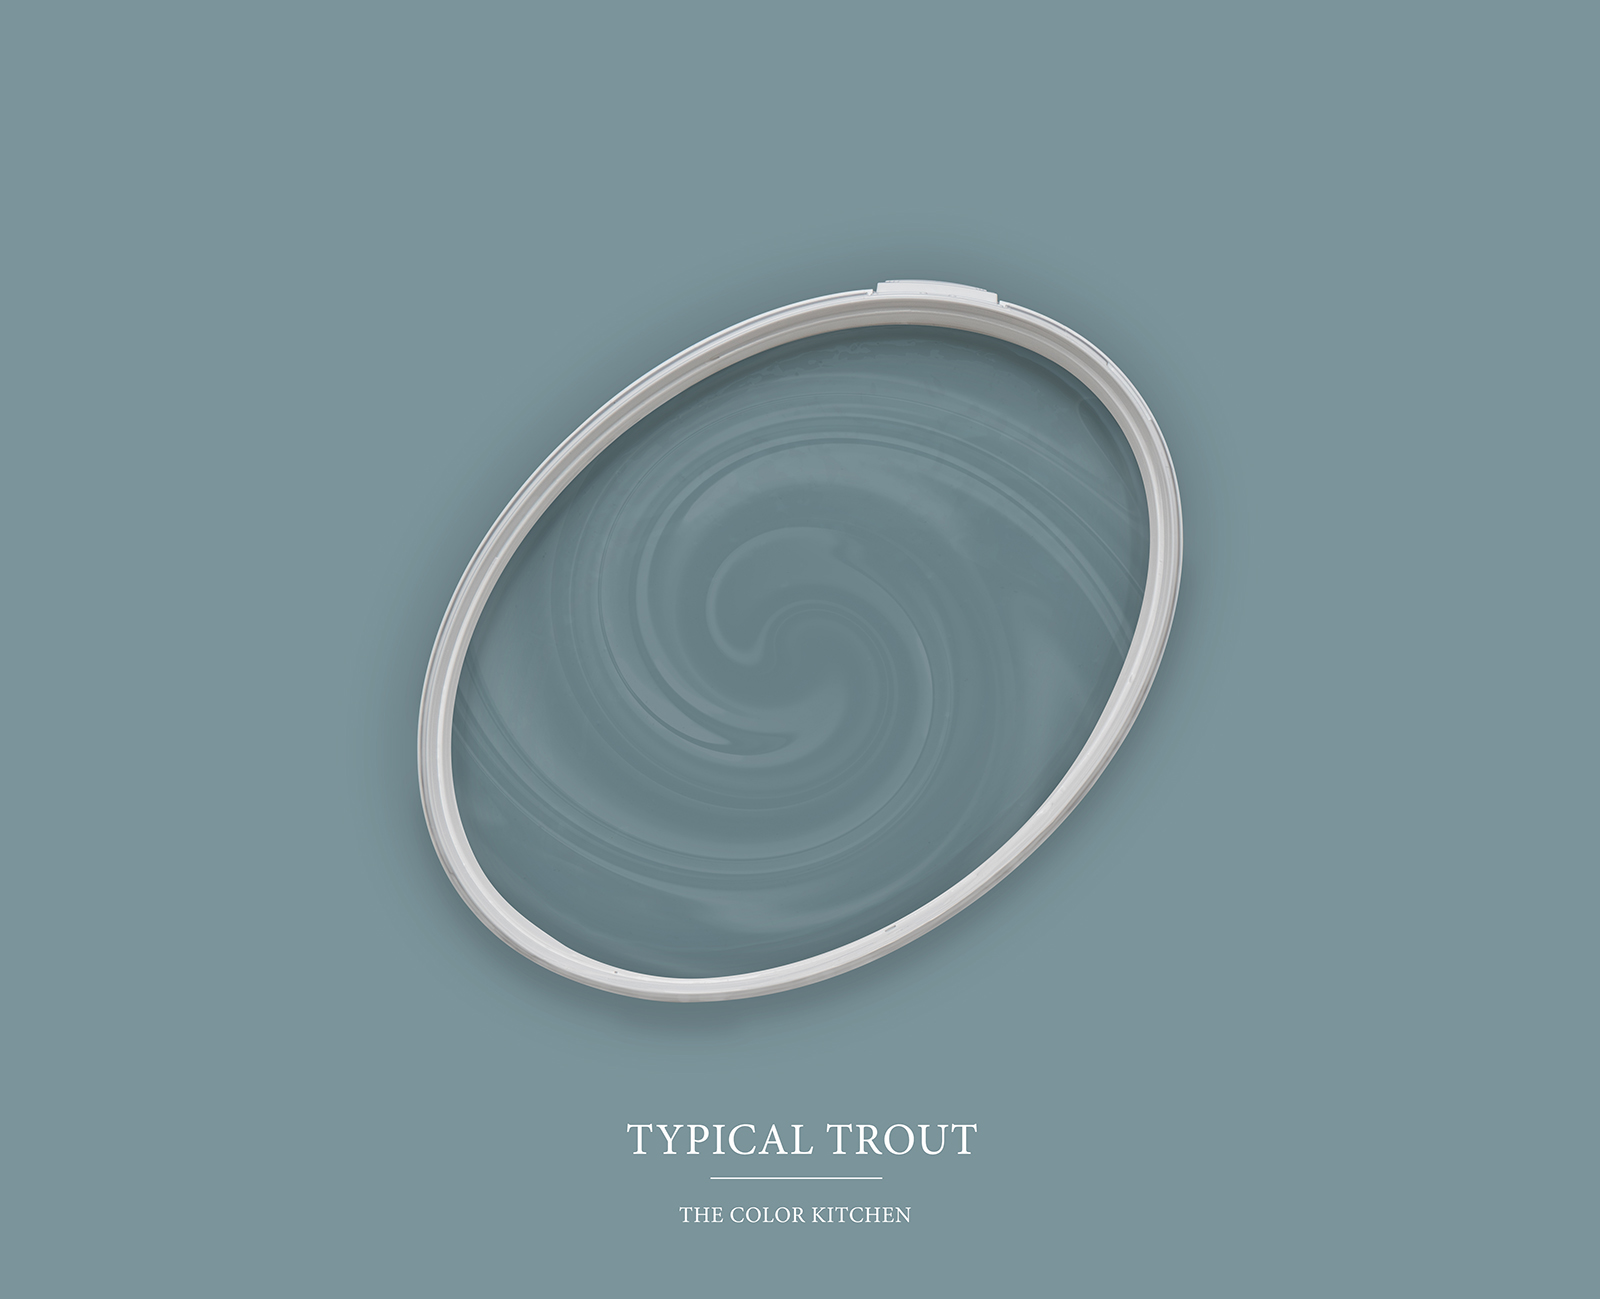         Wall Paint TCK3010 »Typical Trout« in light blue-grey – 2.5 litre
    